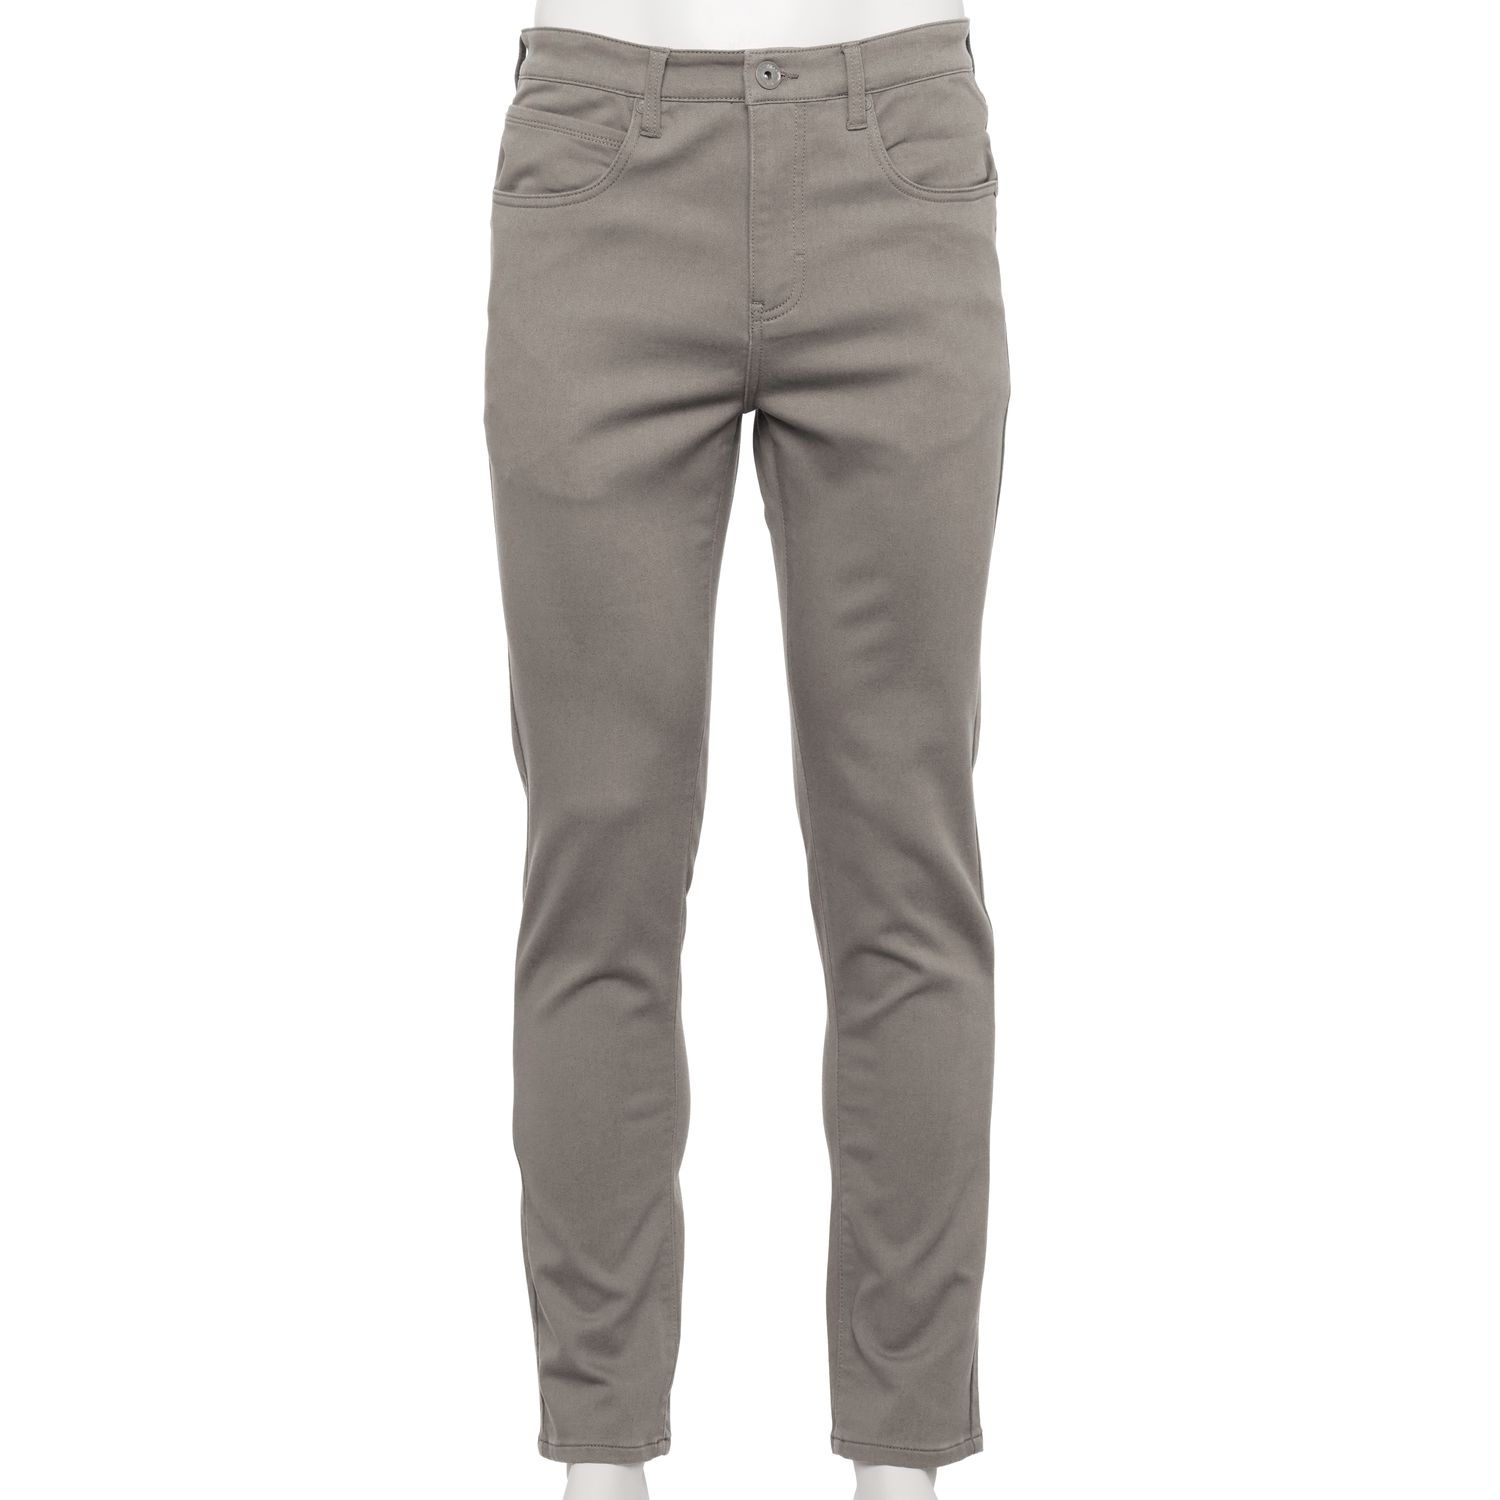 Image for Hollywood Jeans Men's Knit Twill 5-Pocket Pants at Kohl's.